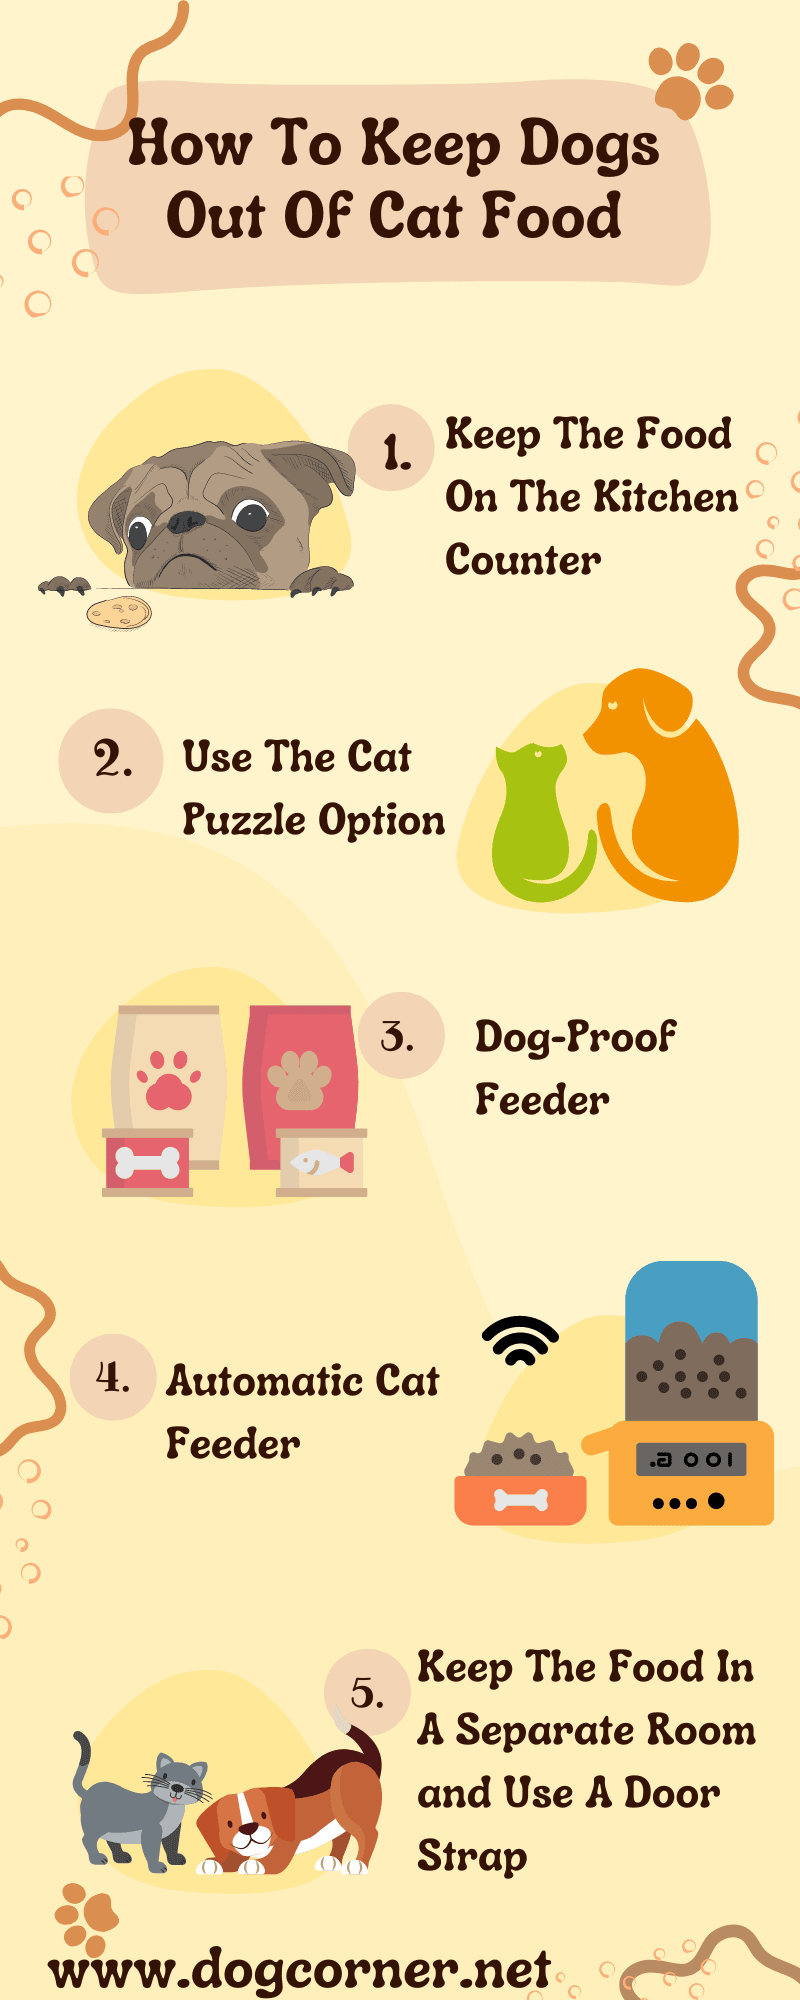 How To Keep Dogs Out Of Cat Food